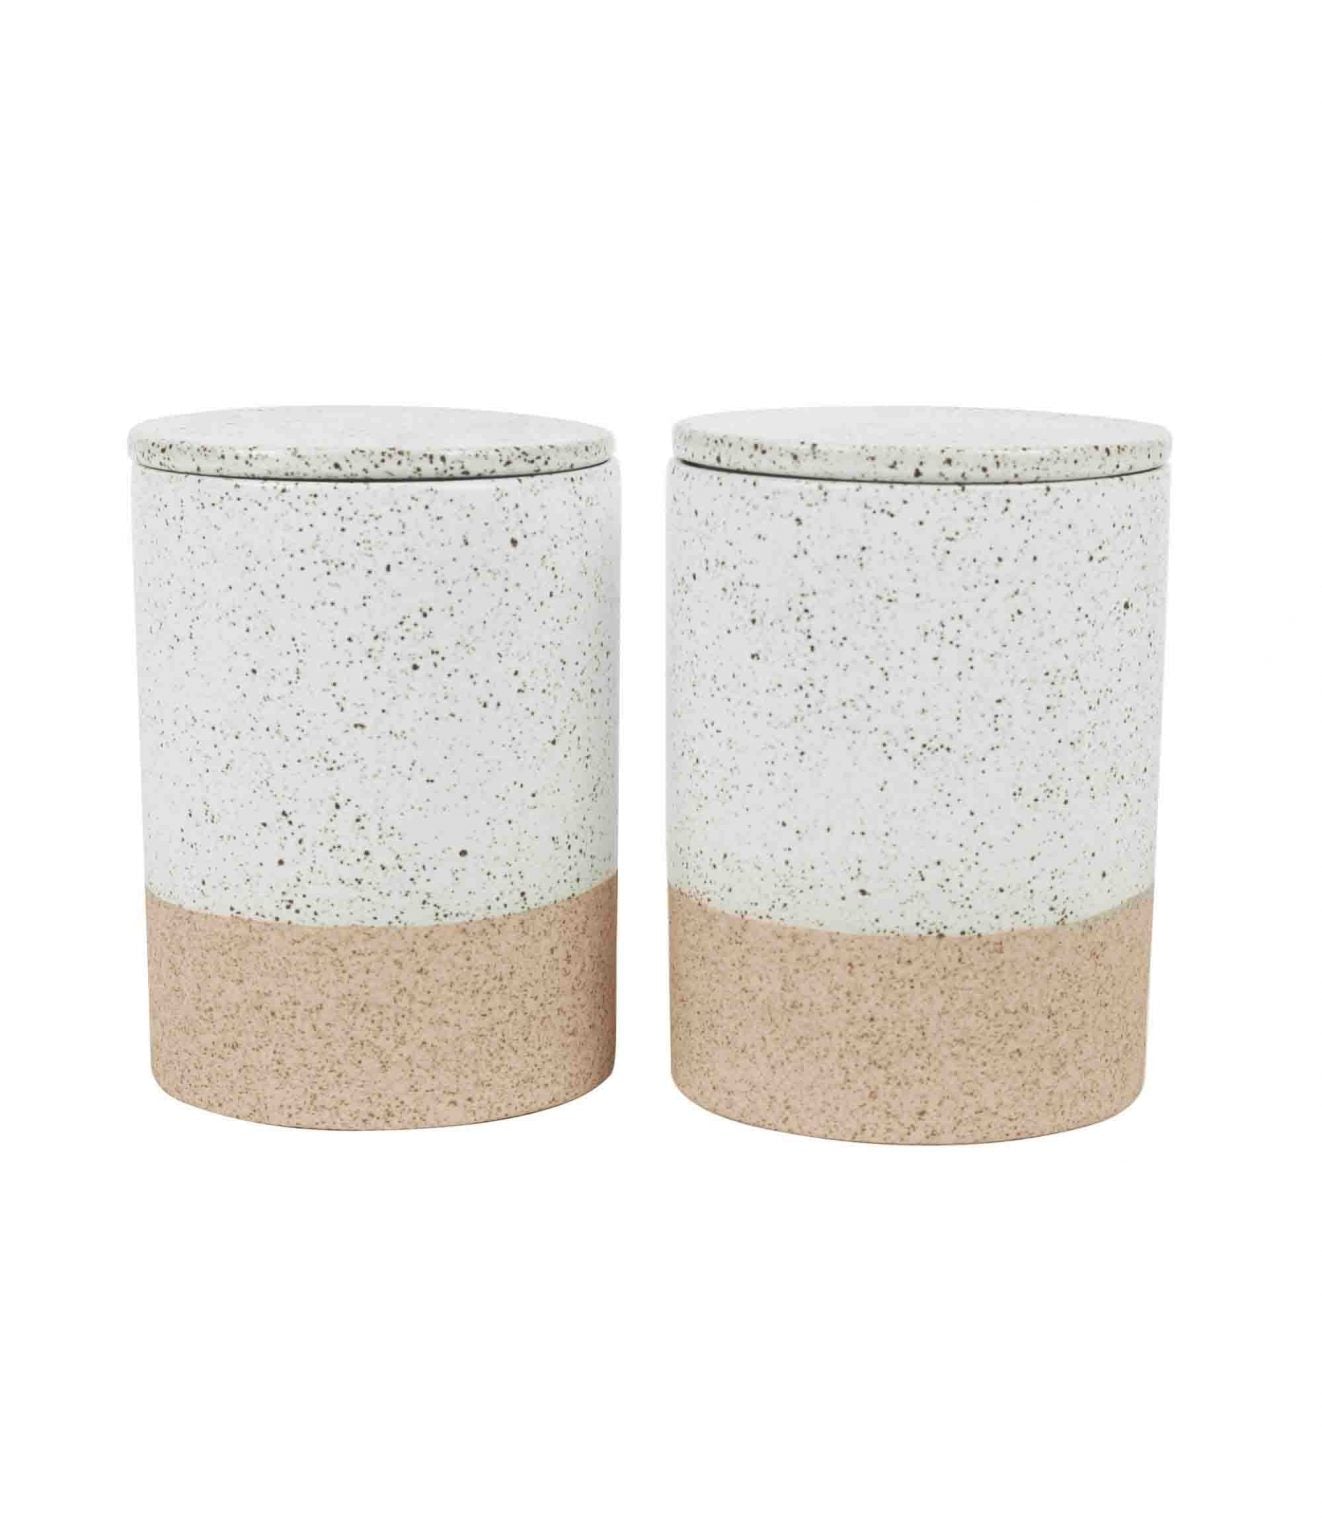 Garden to Table Canister Set of 2